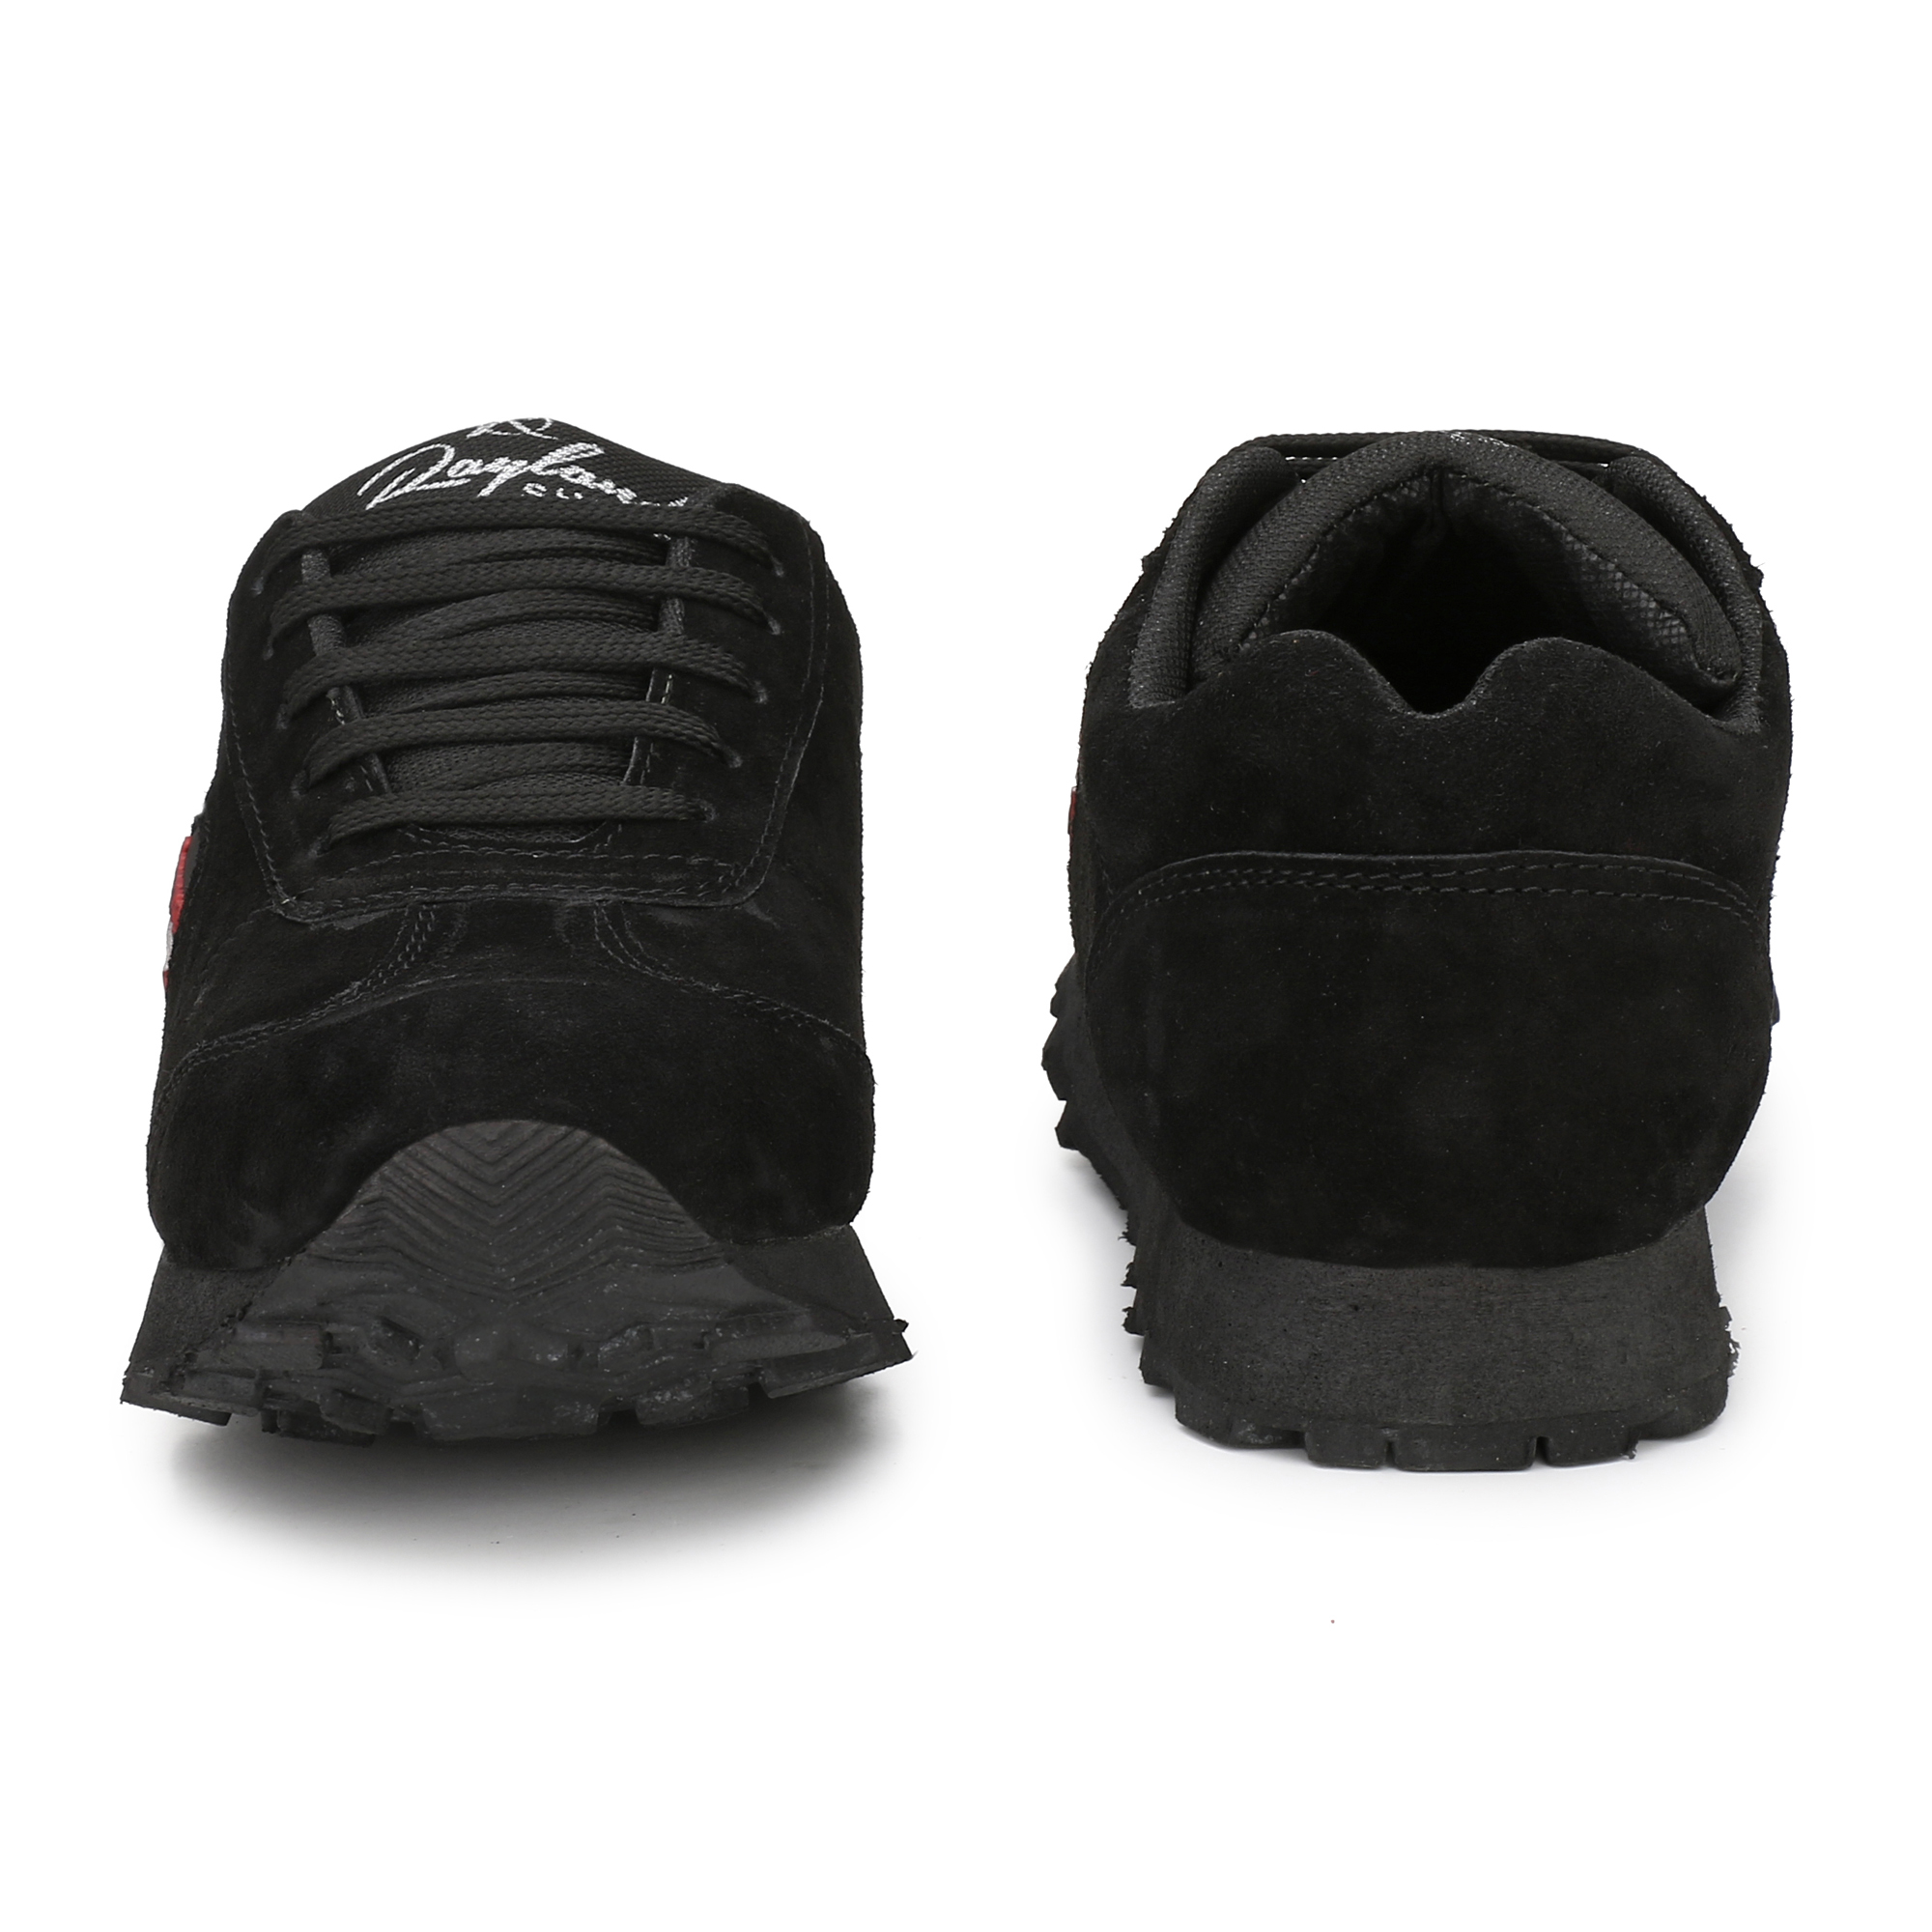 Buy Atton Black Running Shoes For Men Online @ ₹569 from ShopClues